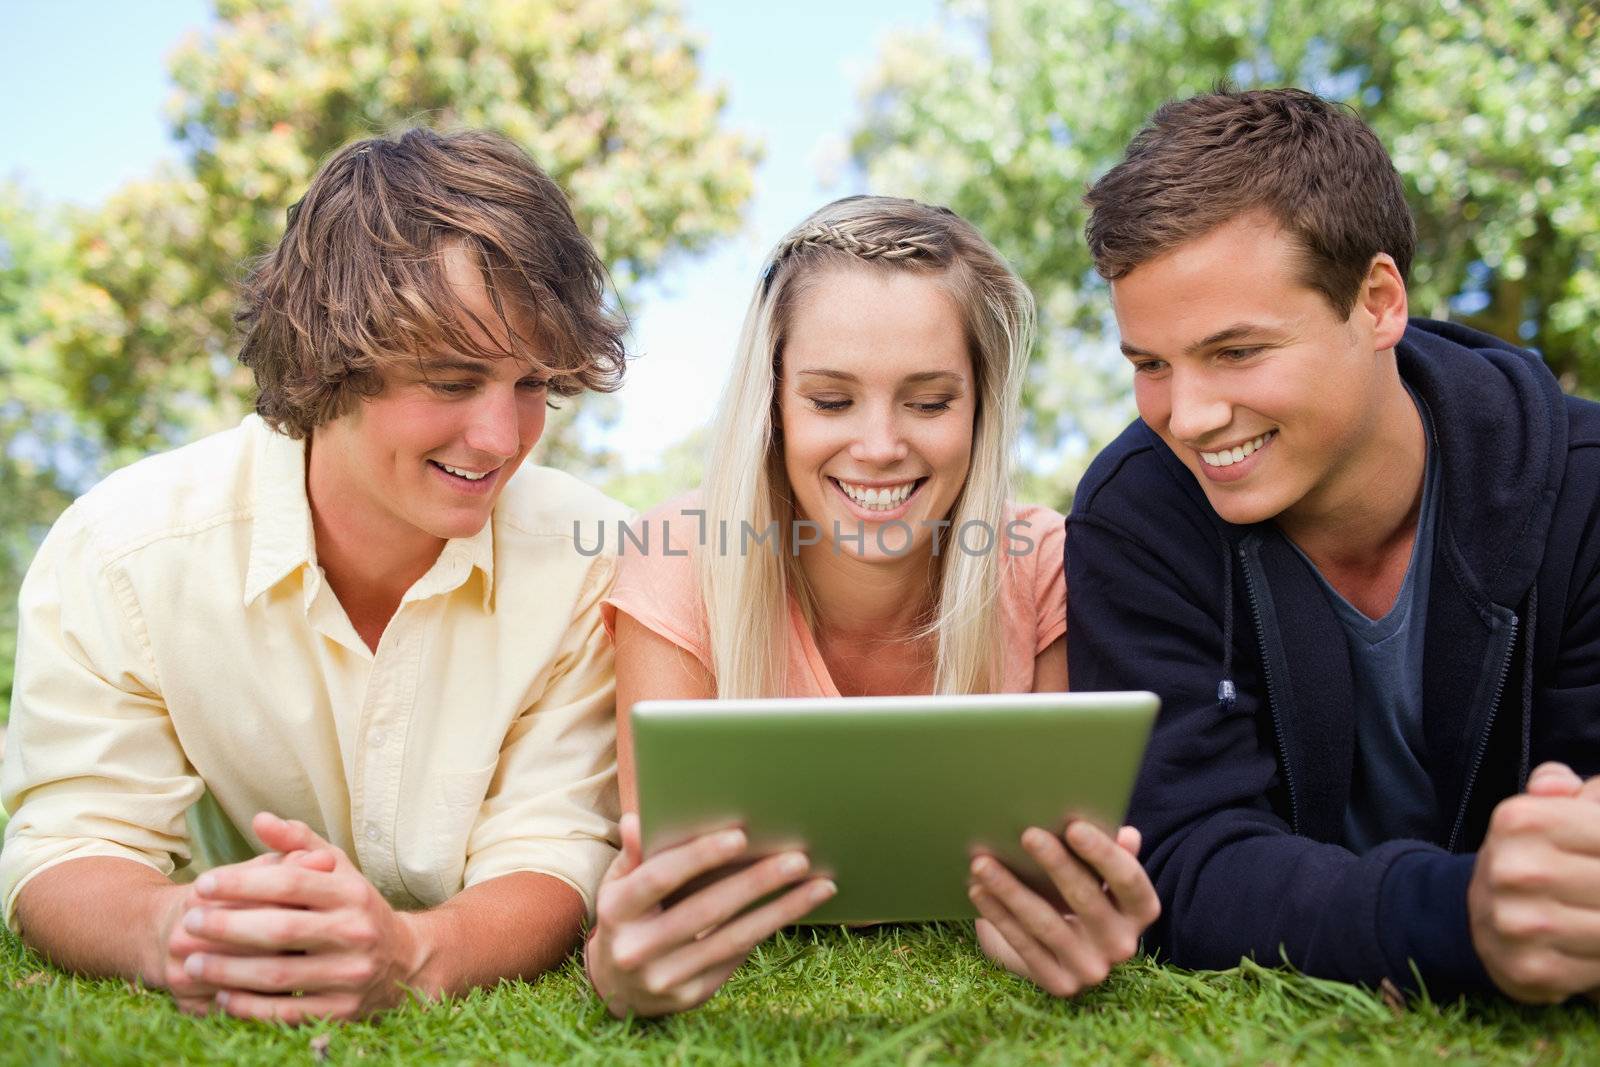 Three students using a tactile tablet while lying in a park